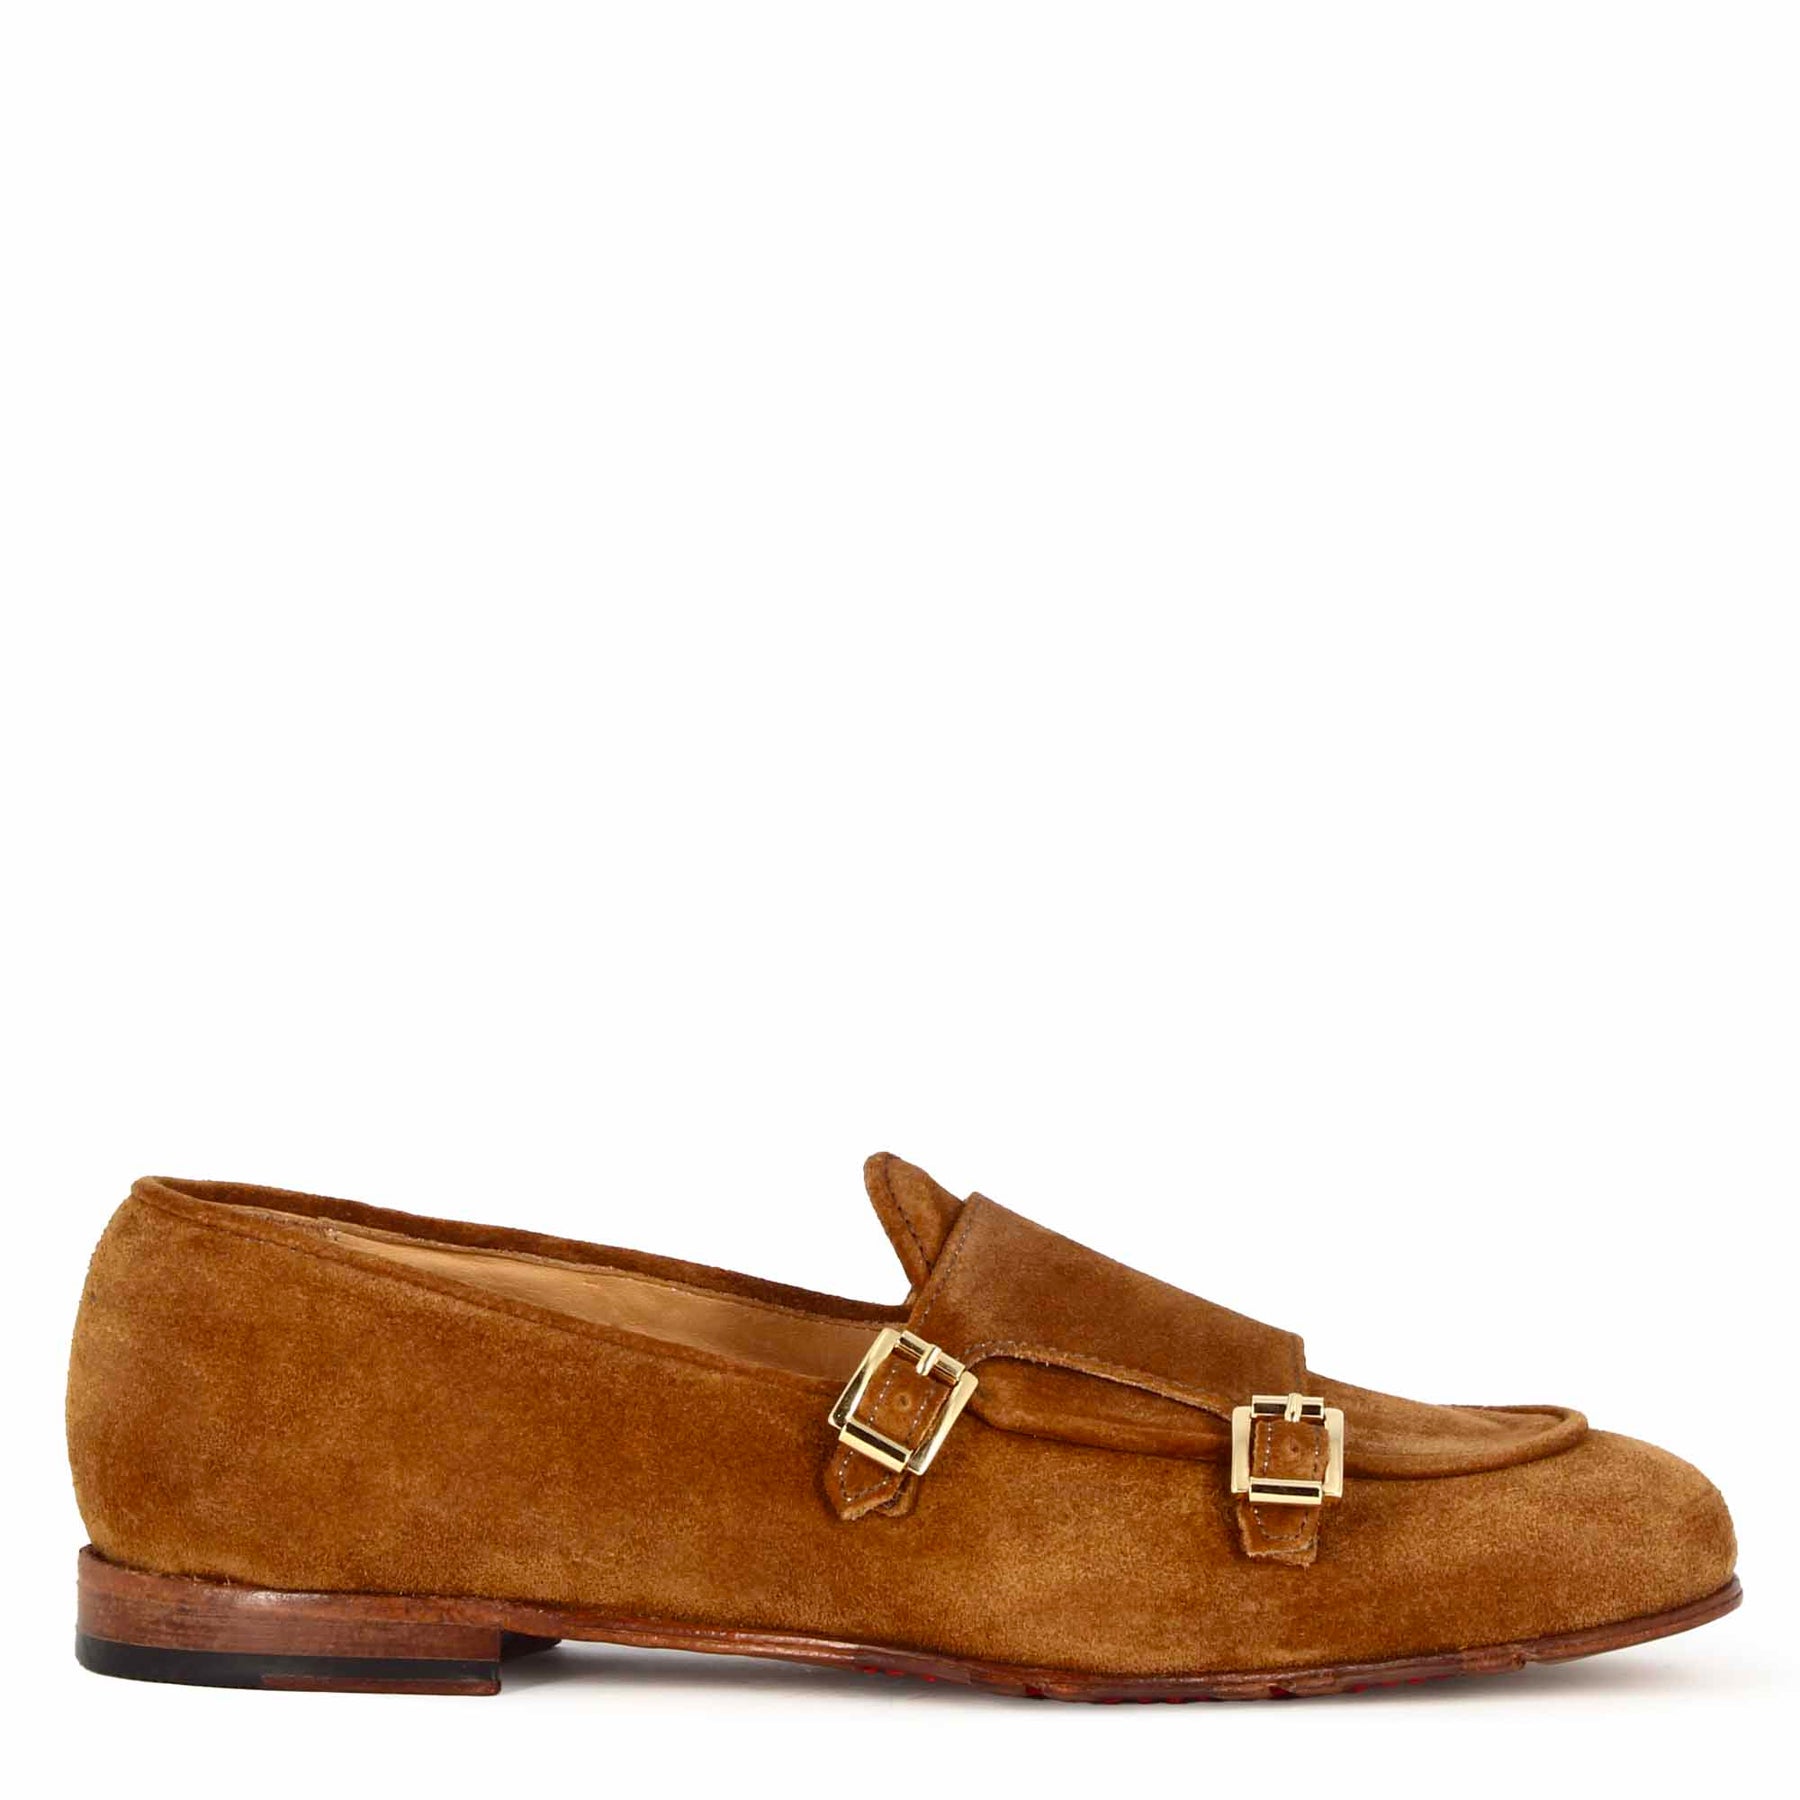 Men's moccasin in light brown suede with double buckle